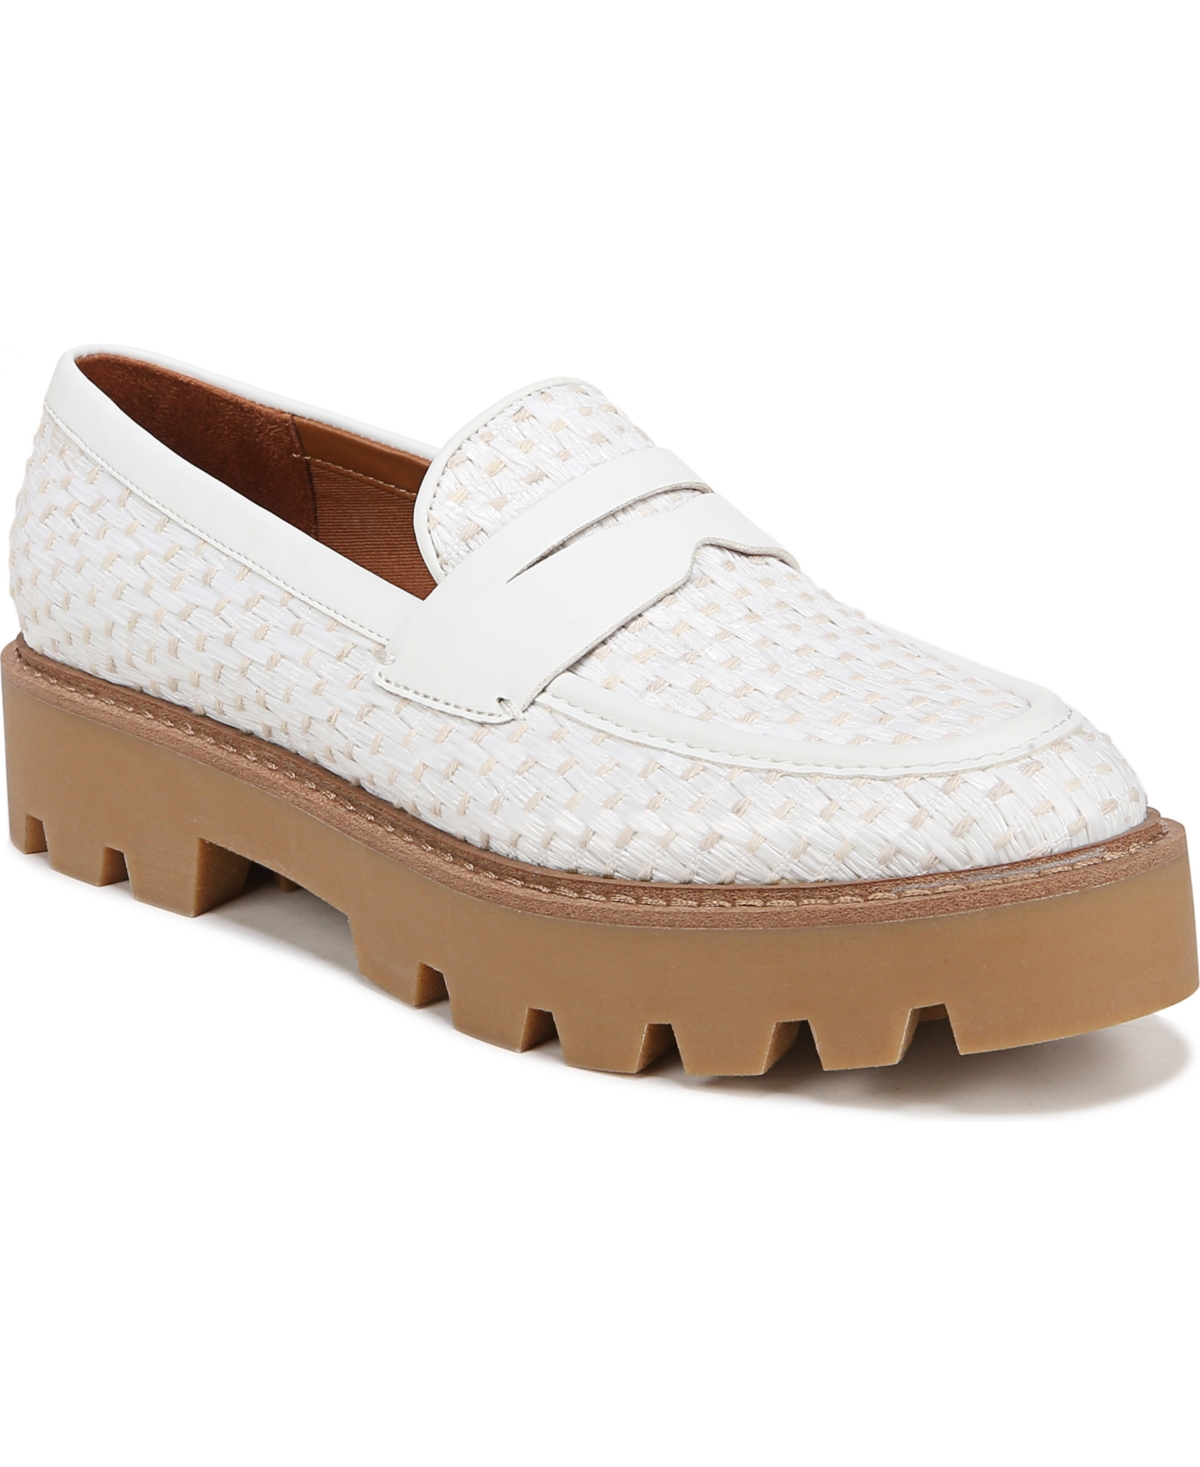 Women's Balin Lug Sole Loafers - White Fabric/Faux Leather